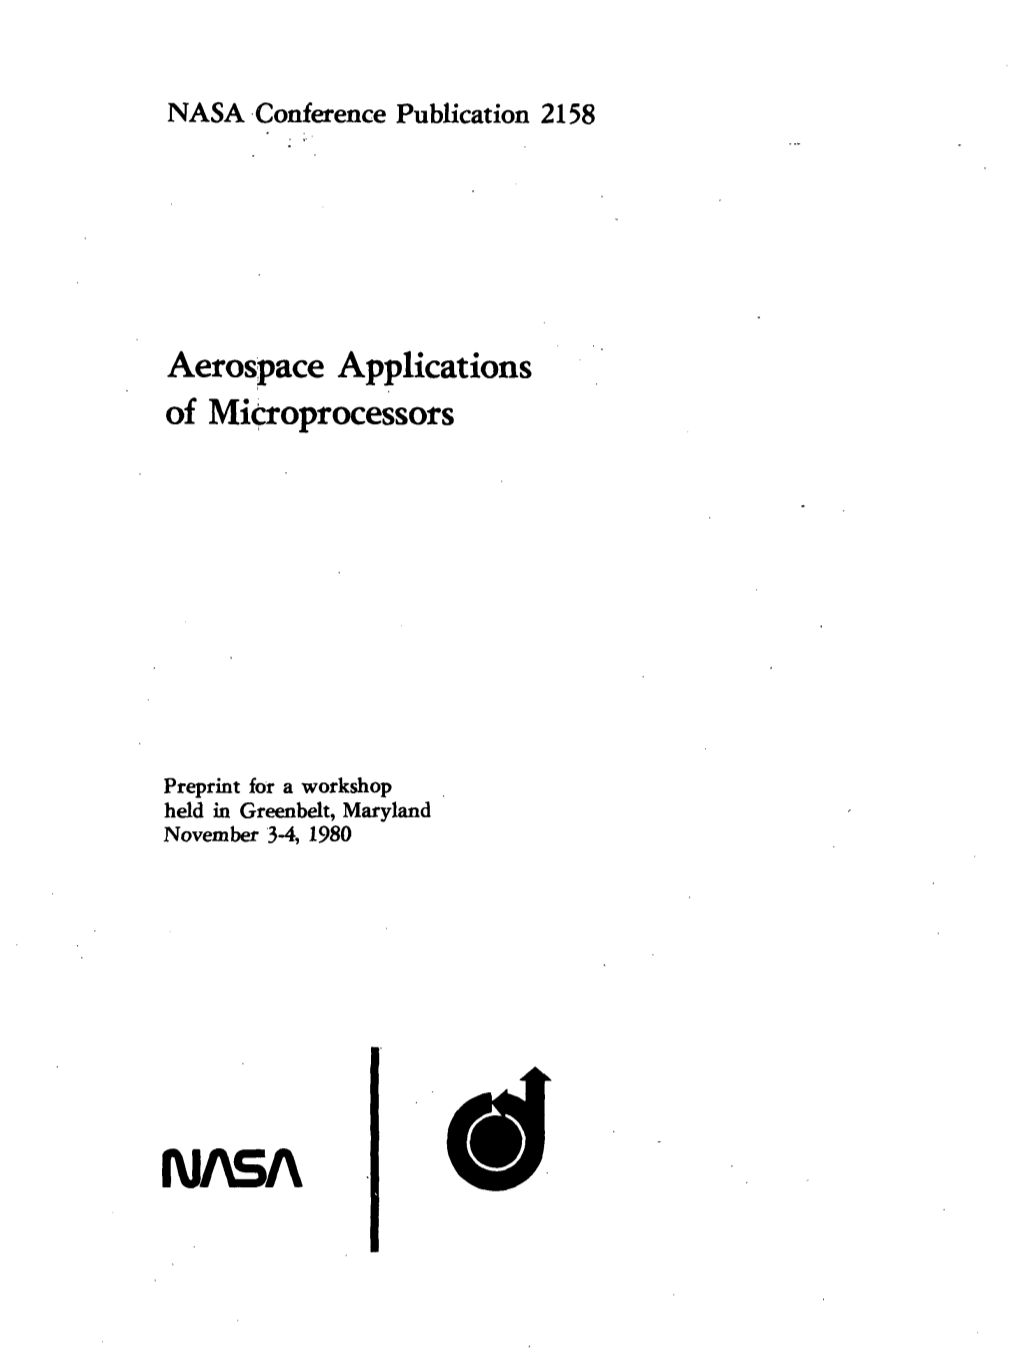 Aerospace Applications of Microprocessors